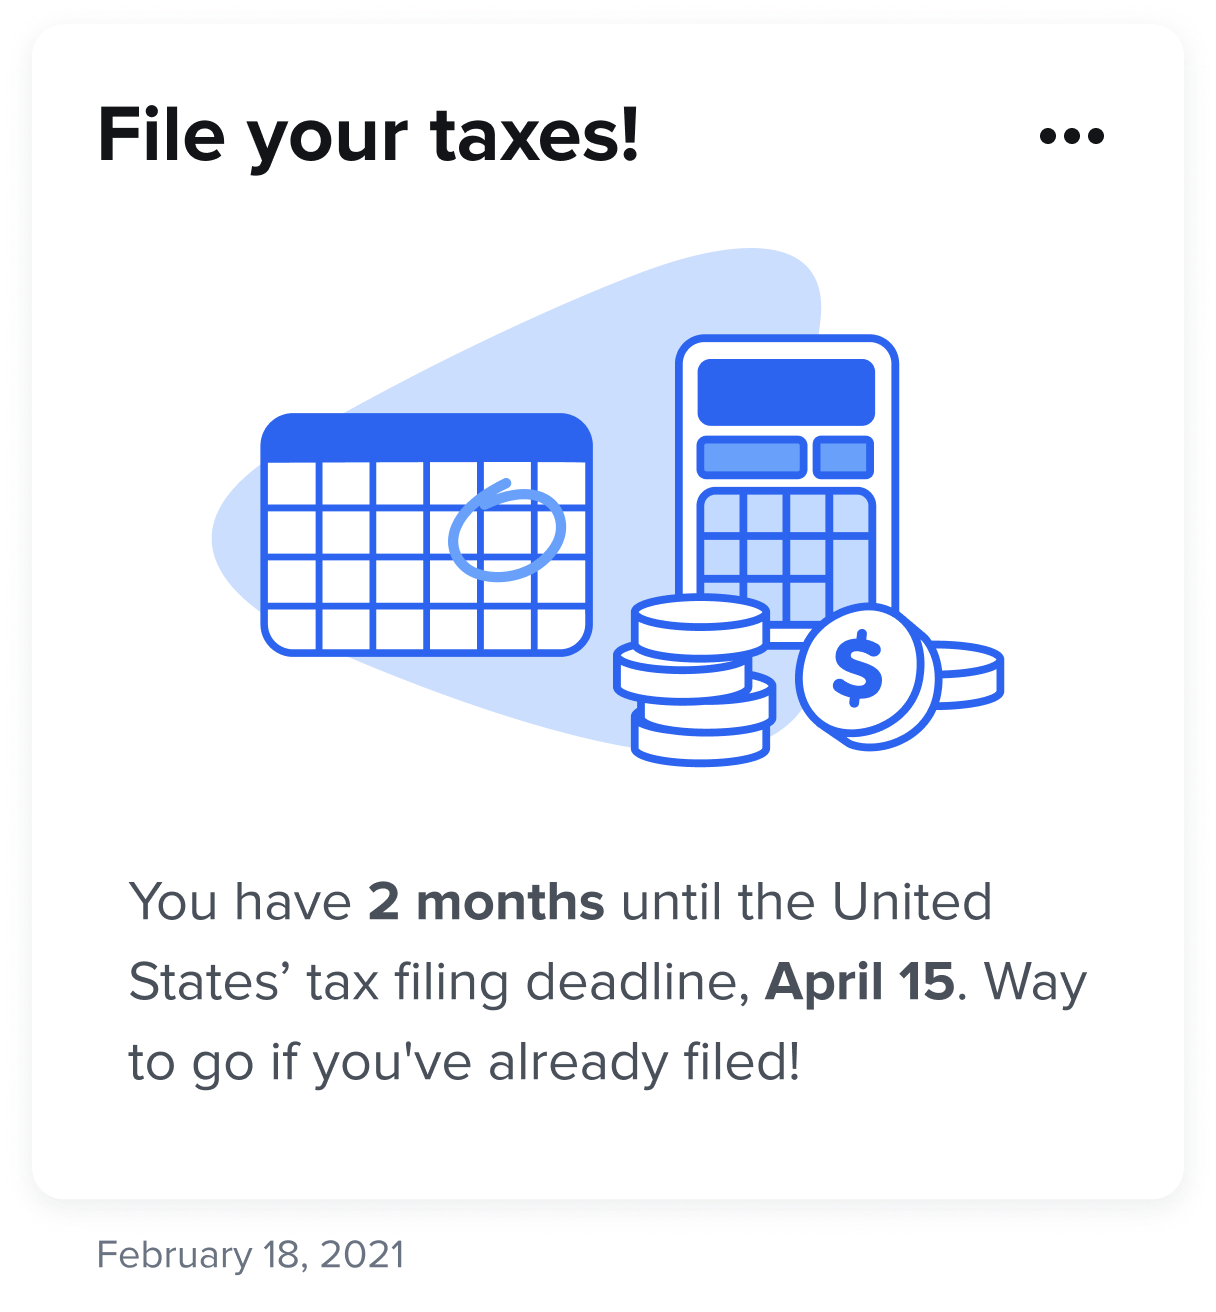 american_upcoming_tax_deadline.png